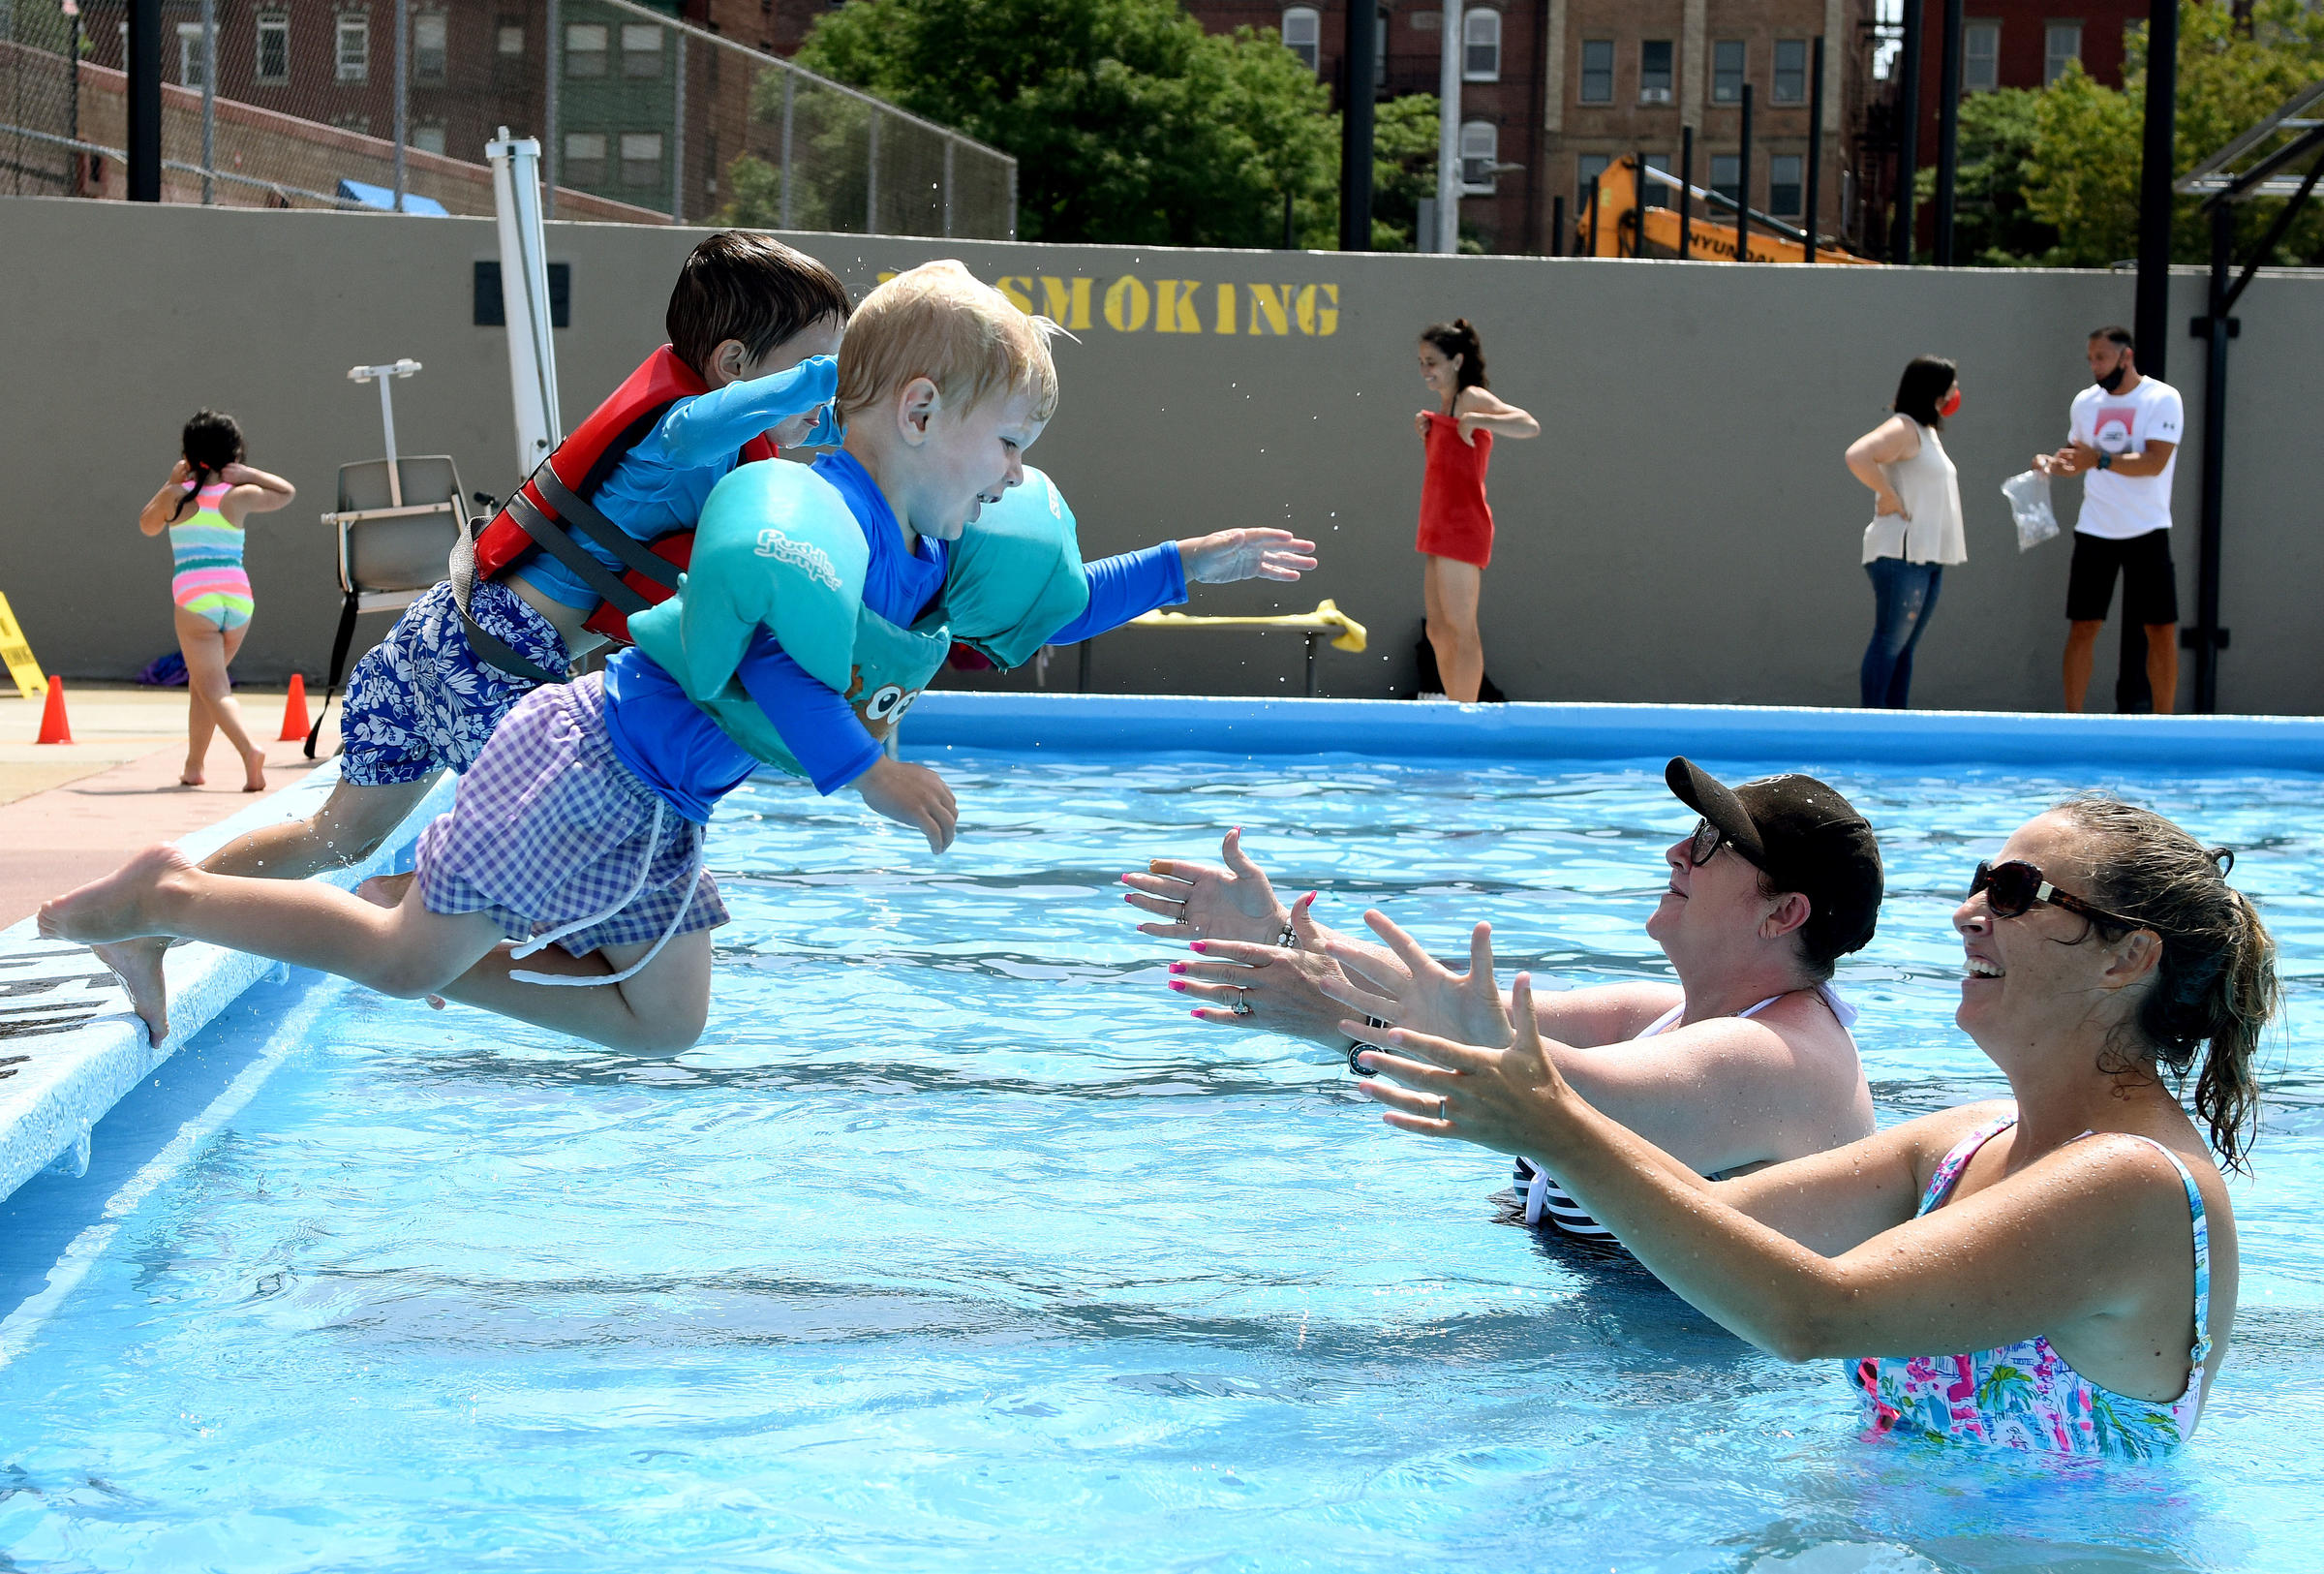 Two kids jump into the pool, into the arms of two adults.